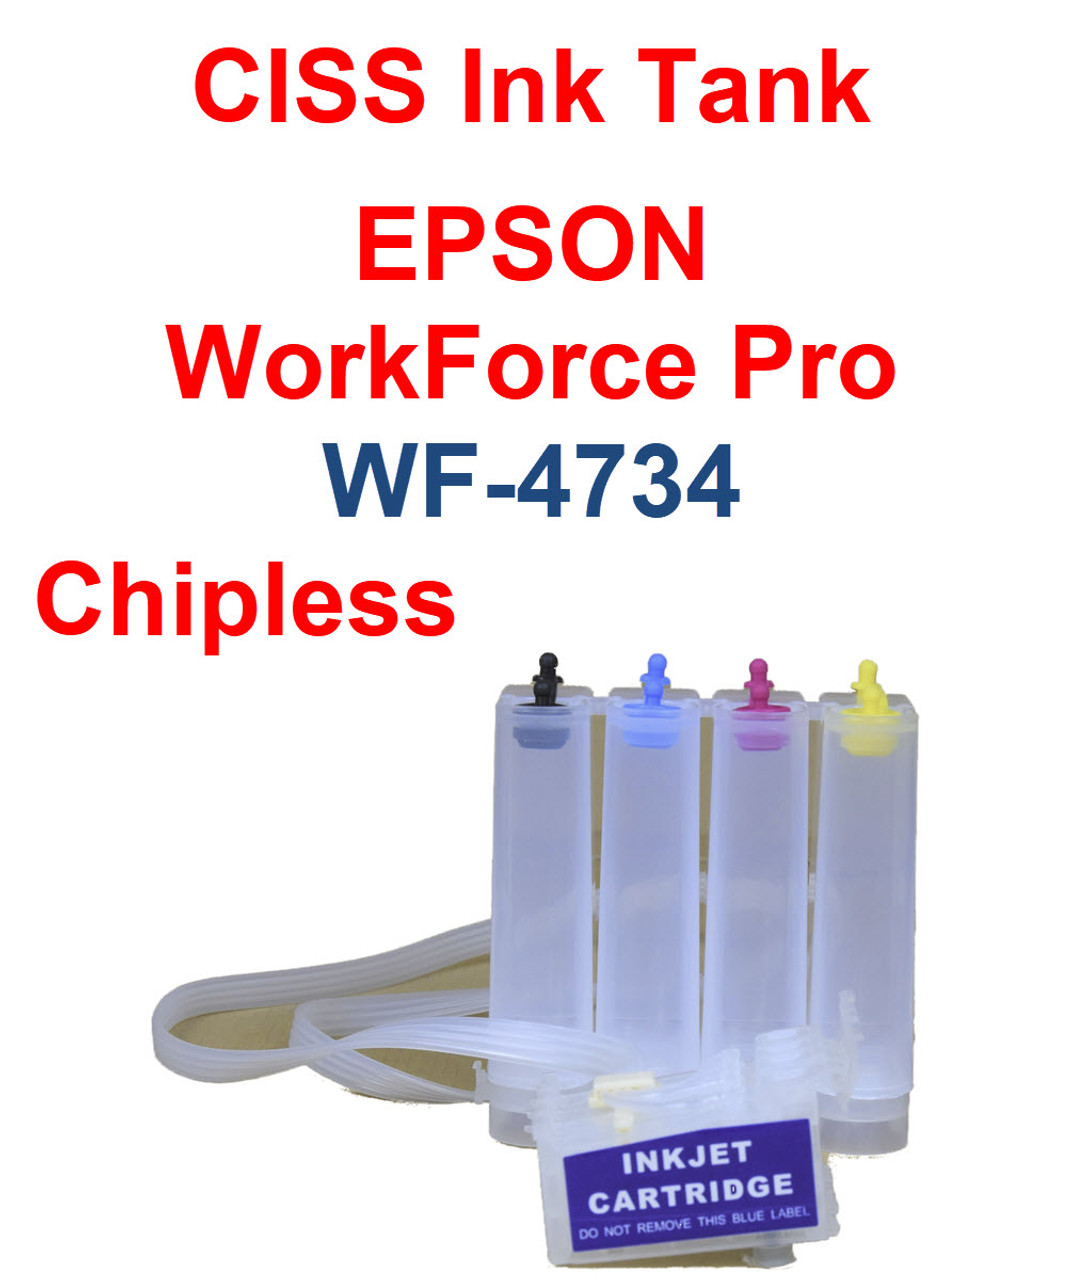 CISS Chipless Ink Tank for Epson WorkForce Pro WF-4734 Printer